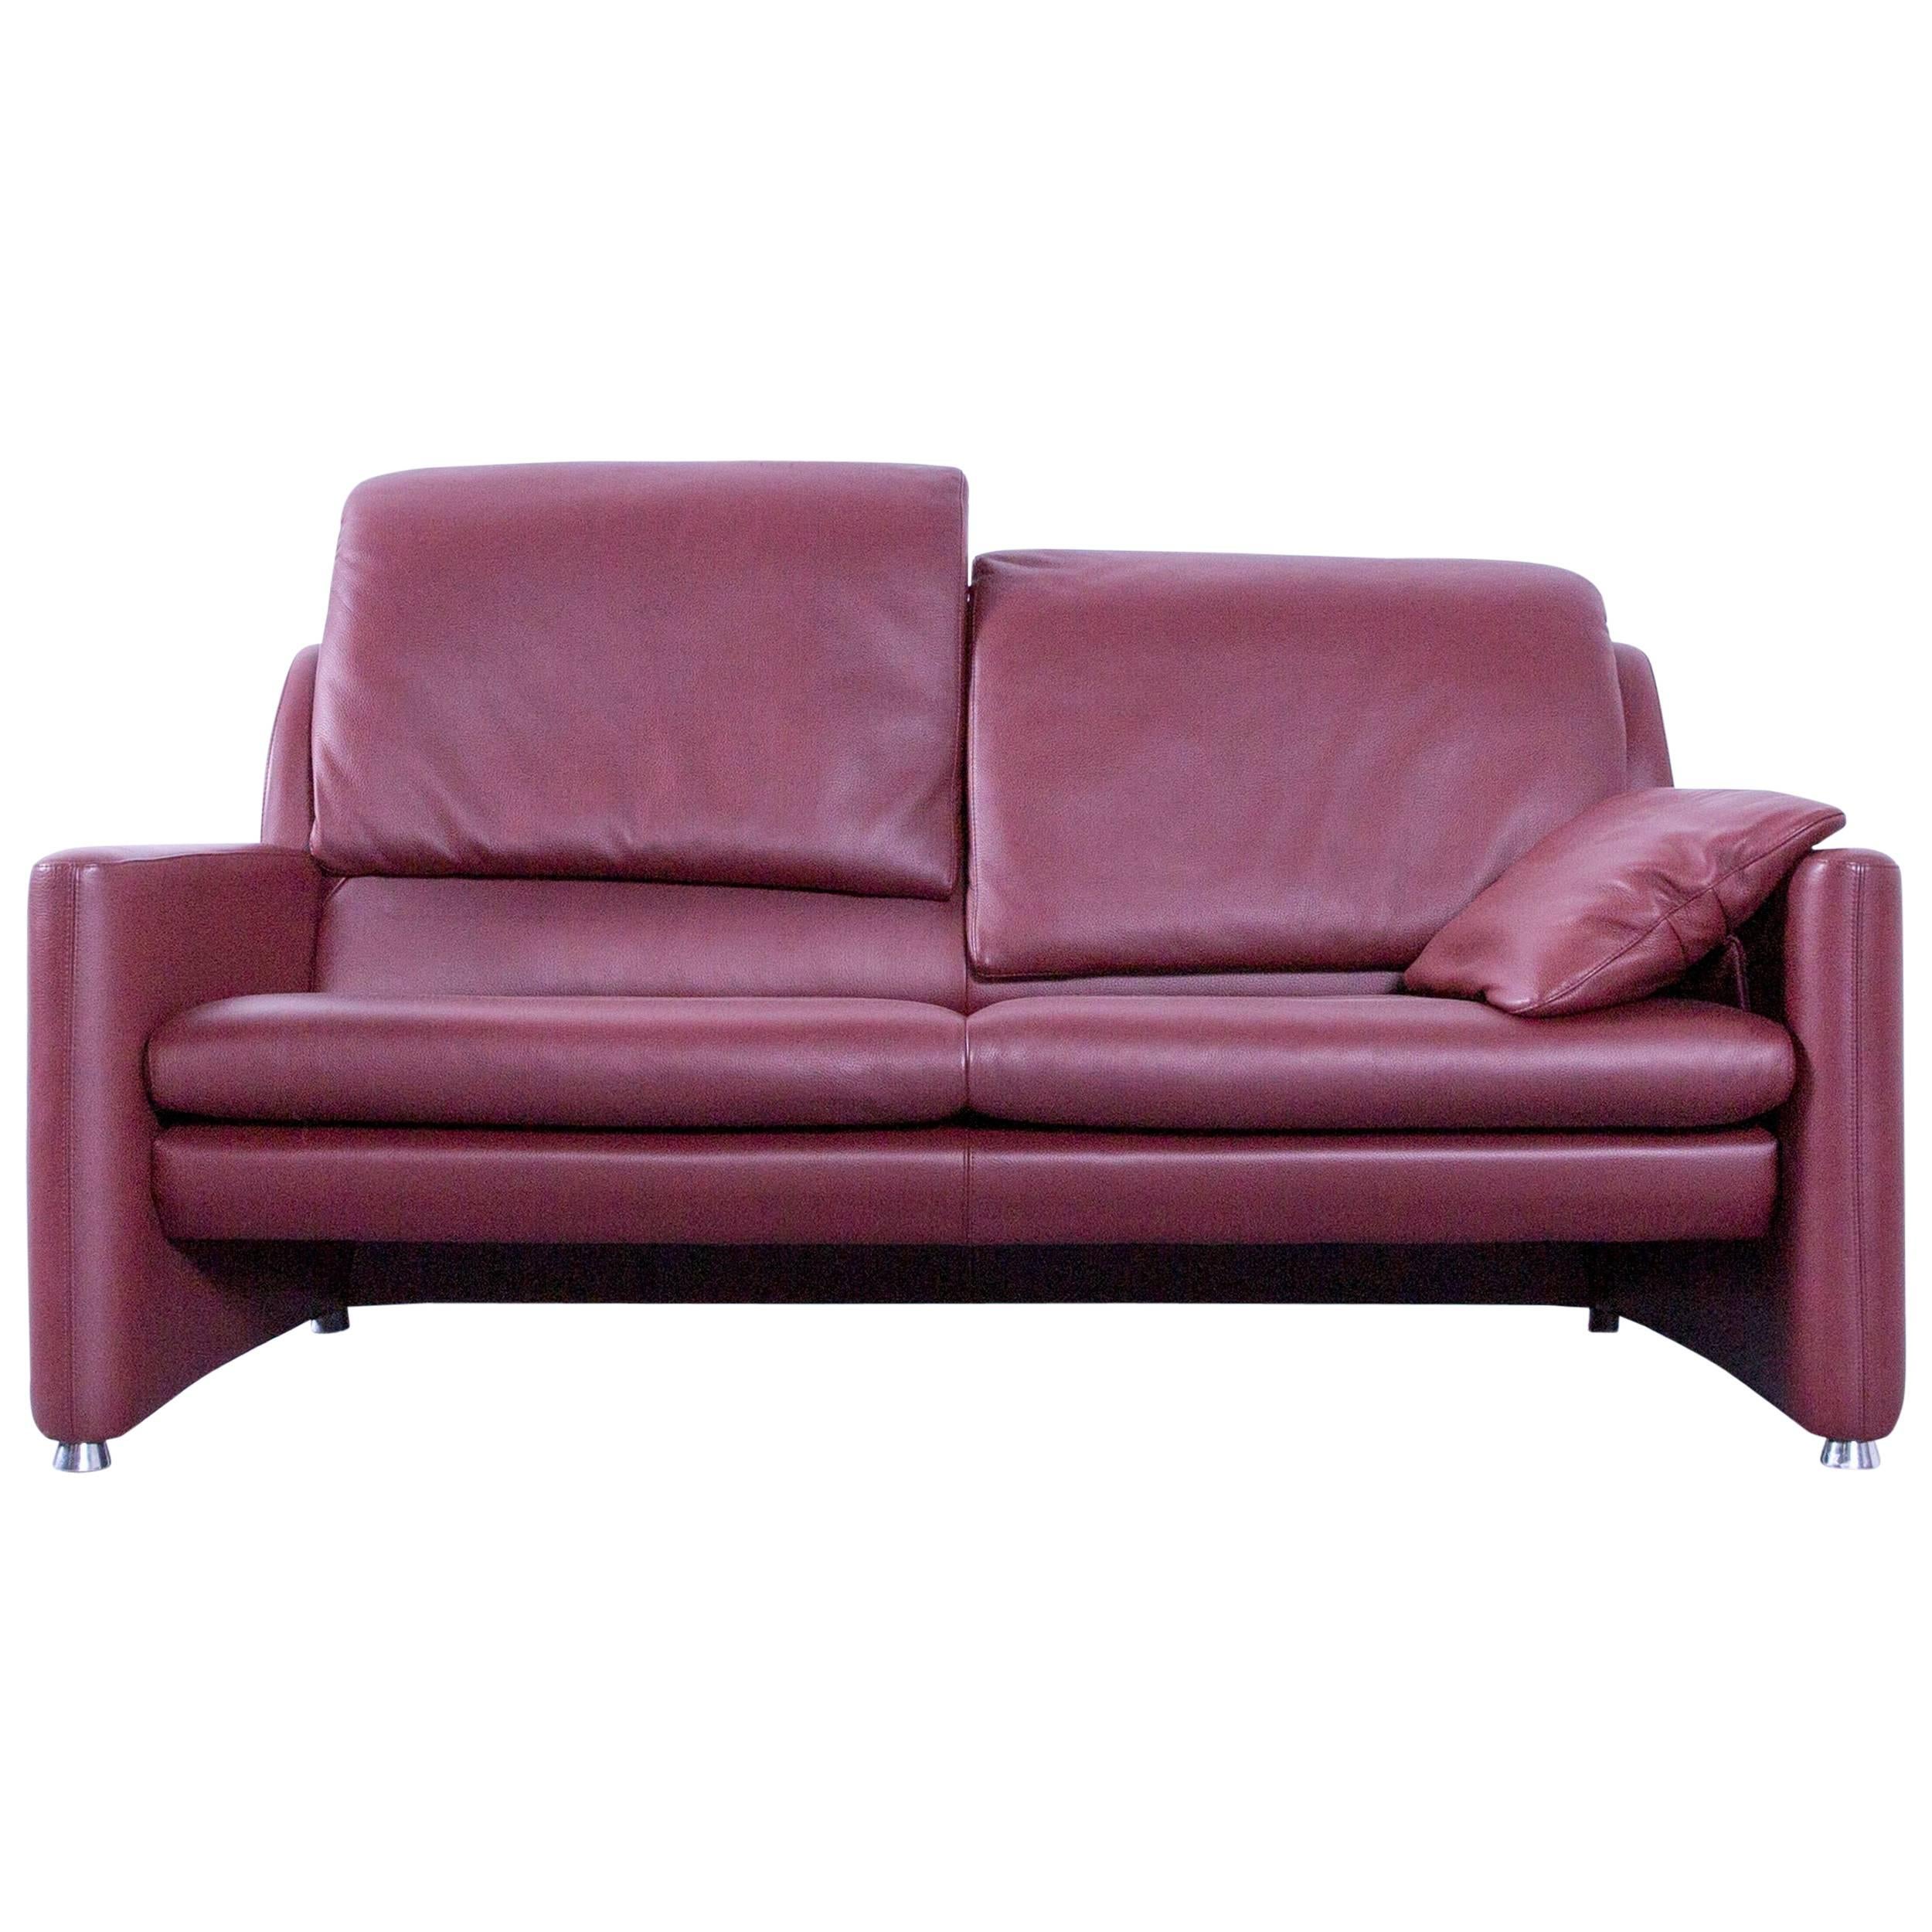 Leolux Fidamigo Designer Leather Sofa Red Two-Seat Function Couch